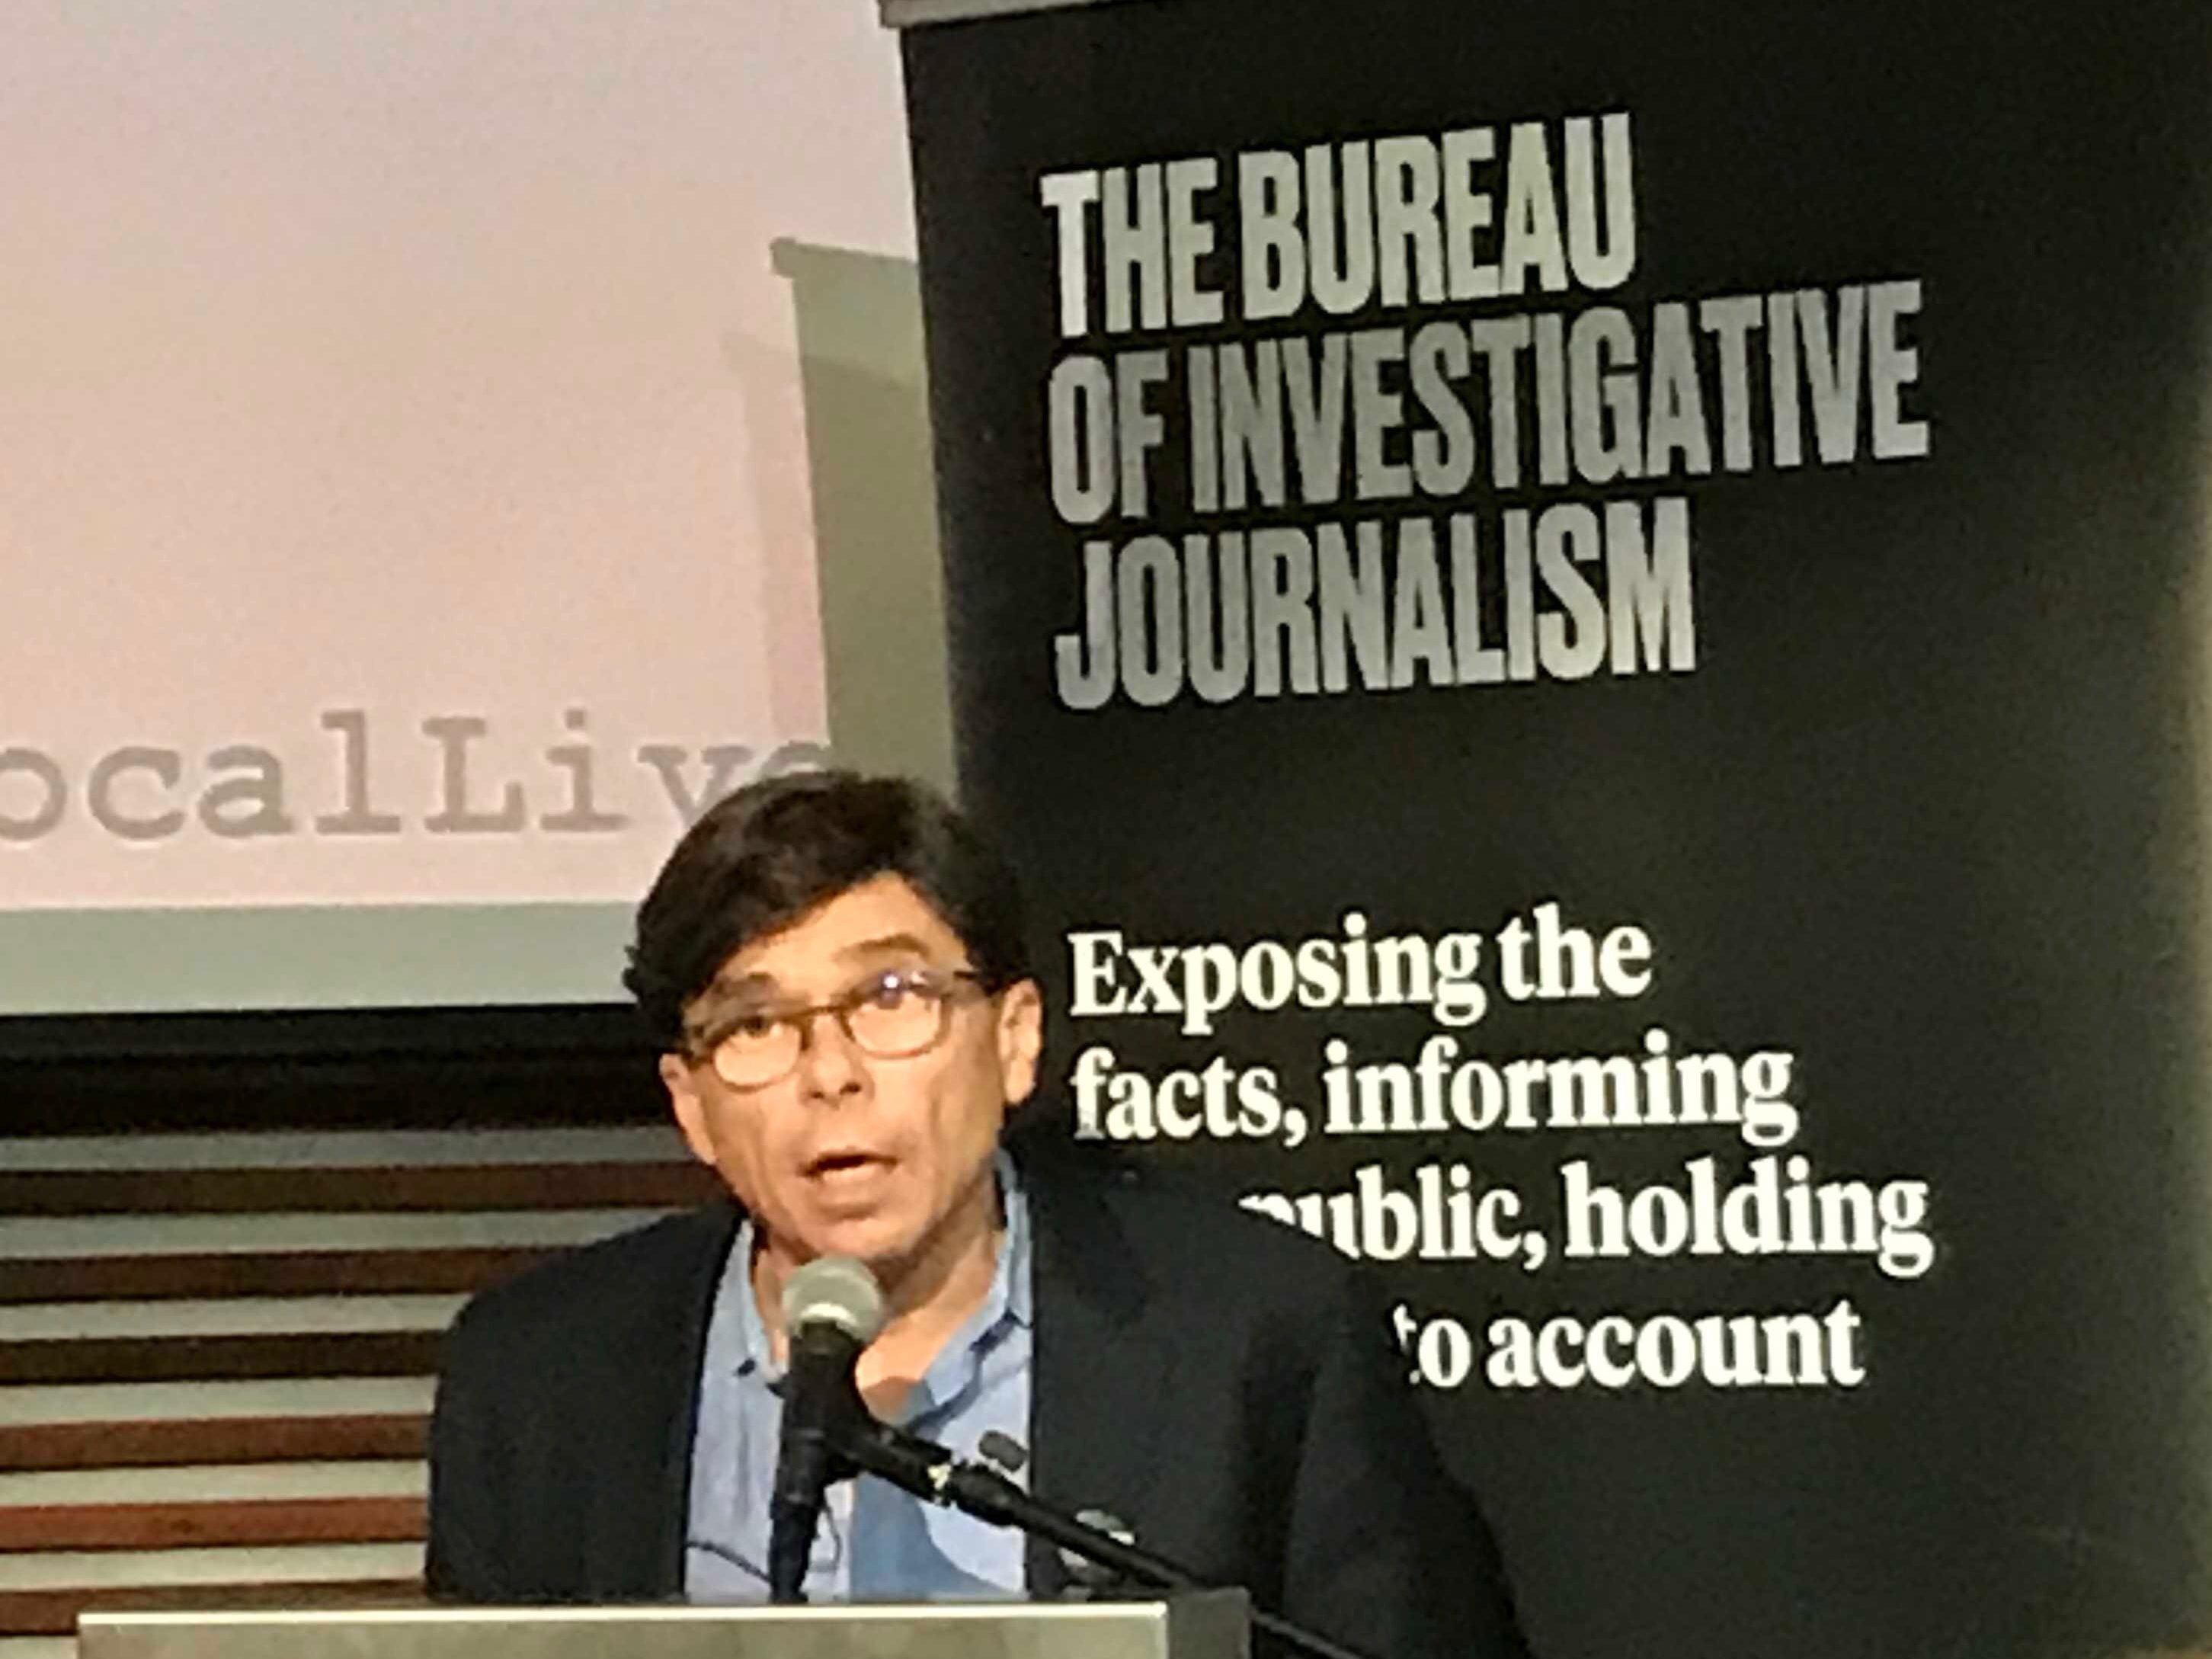 Spotlight reporter Mike Rezendes says investigative reporting is driving subscriptions at Boston Globe